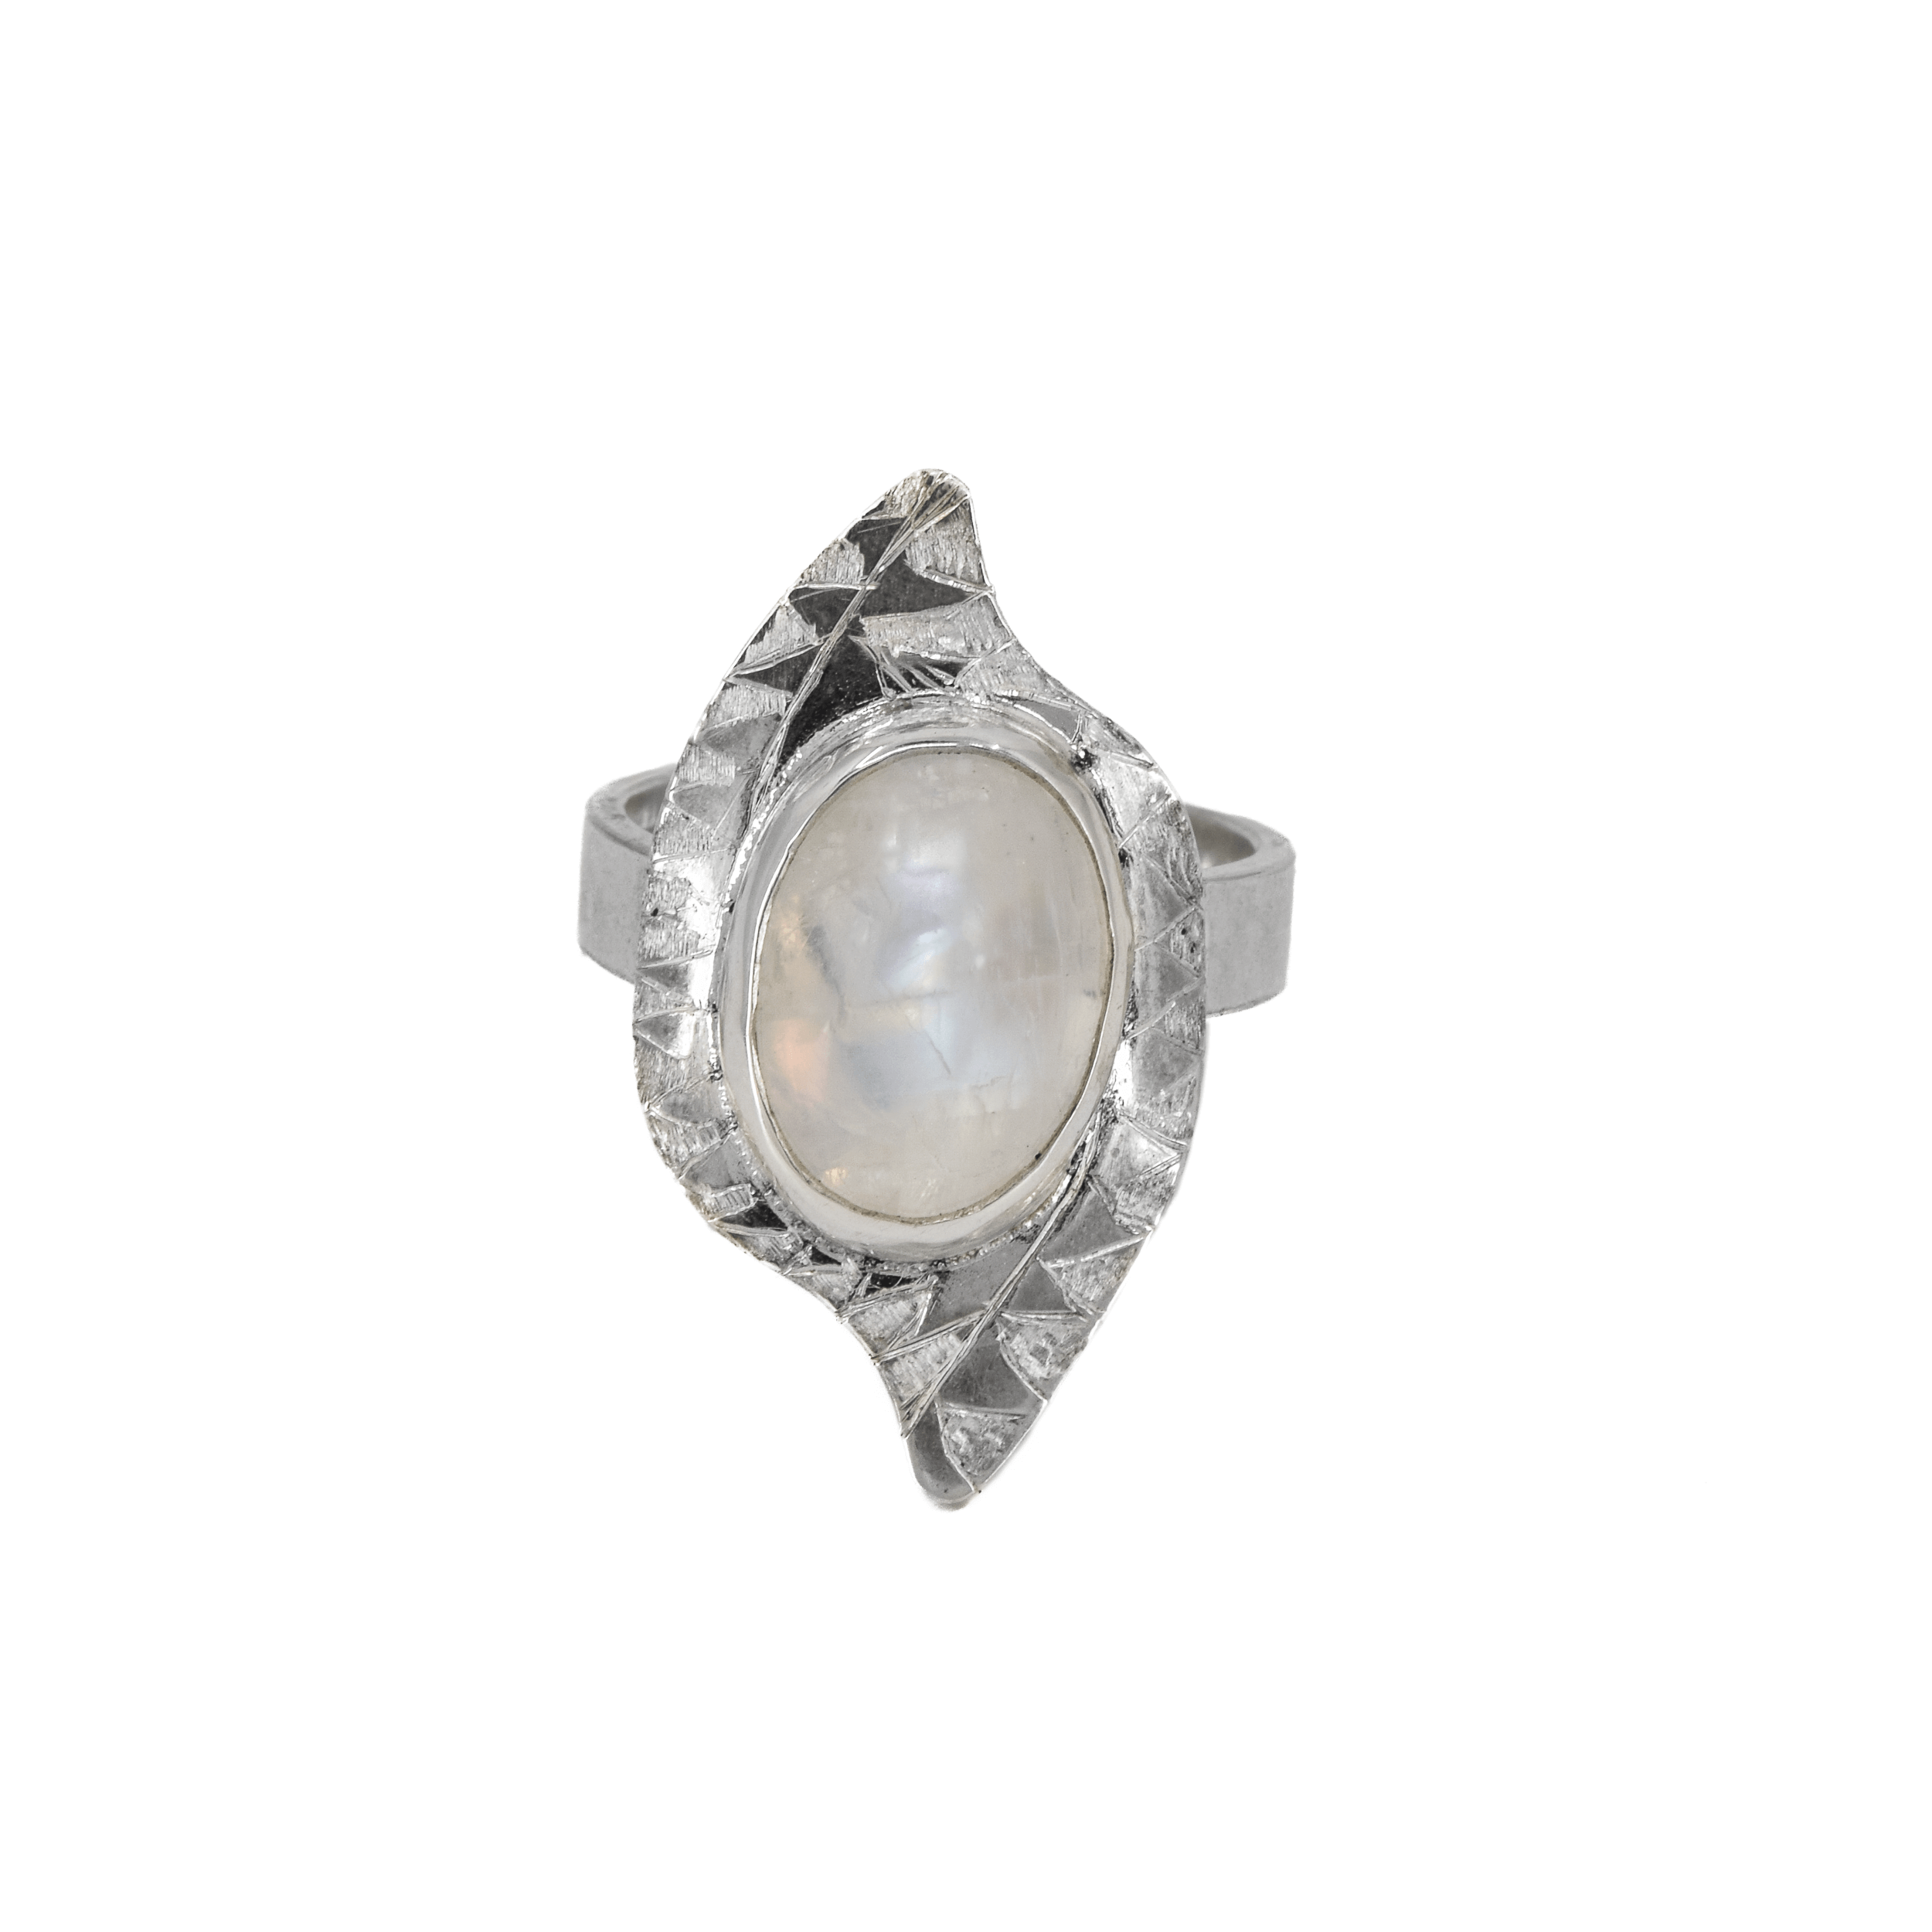 Oval rainbow moonstone sterling silver ring with a tribal style hand textured border